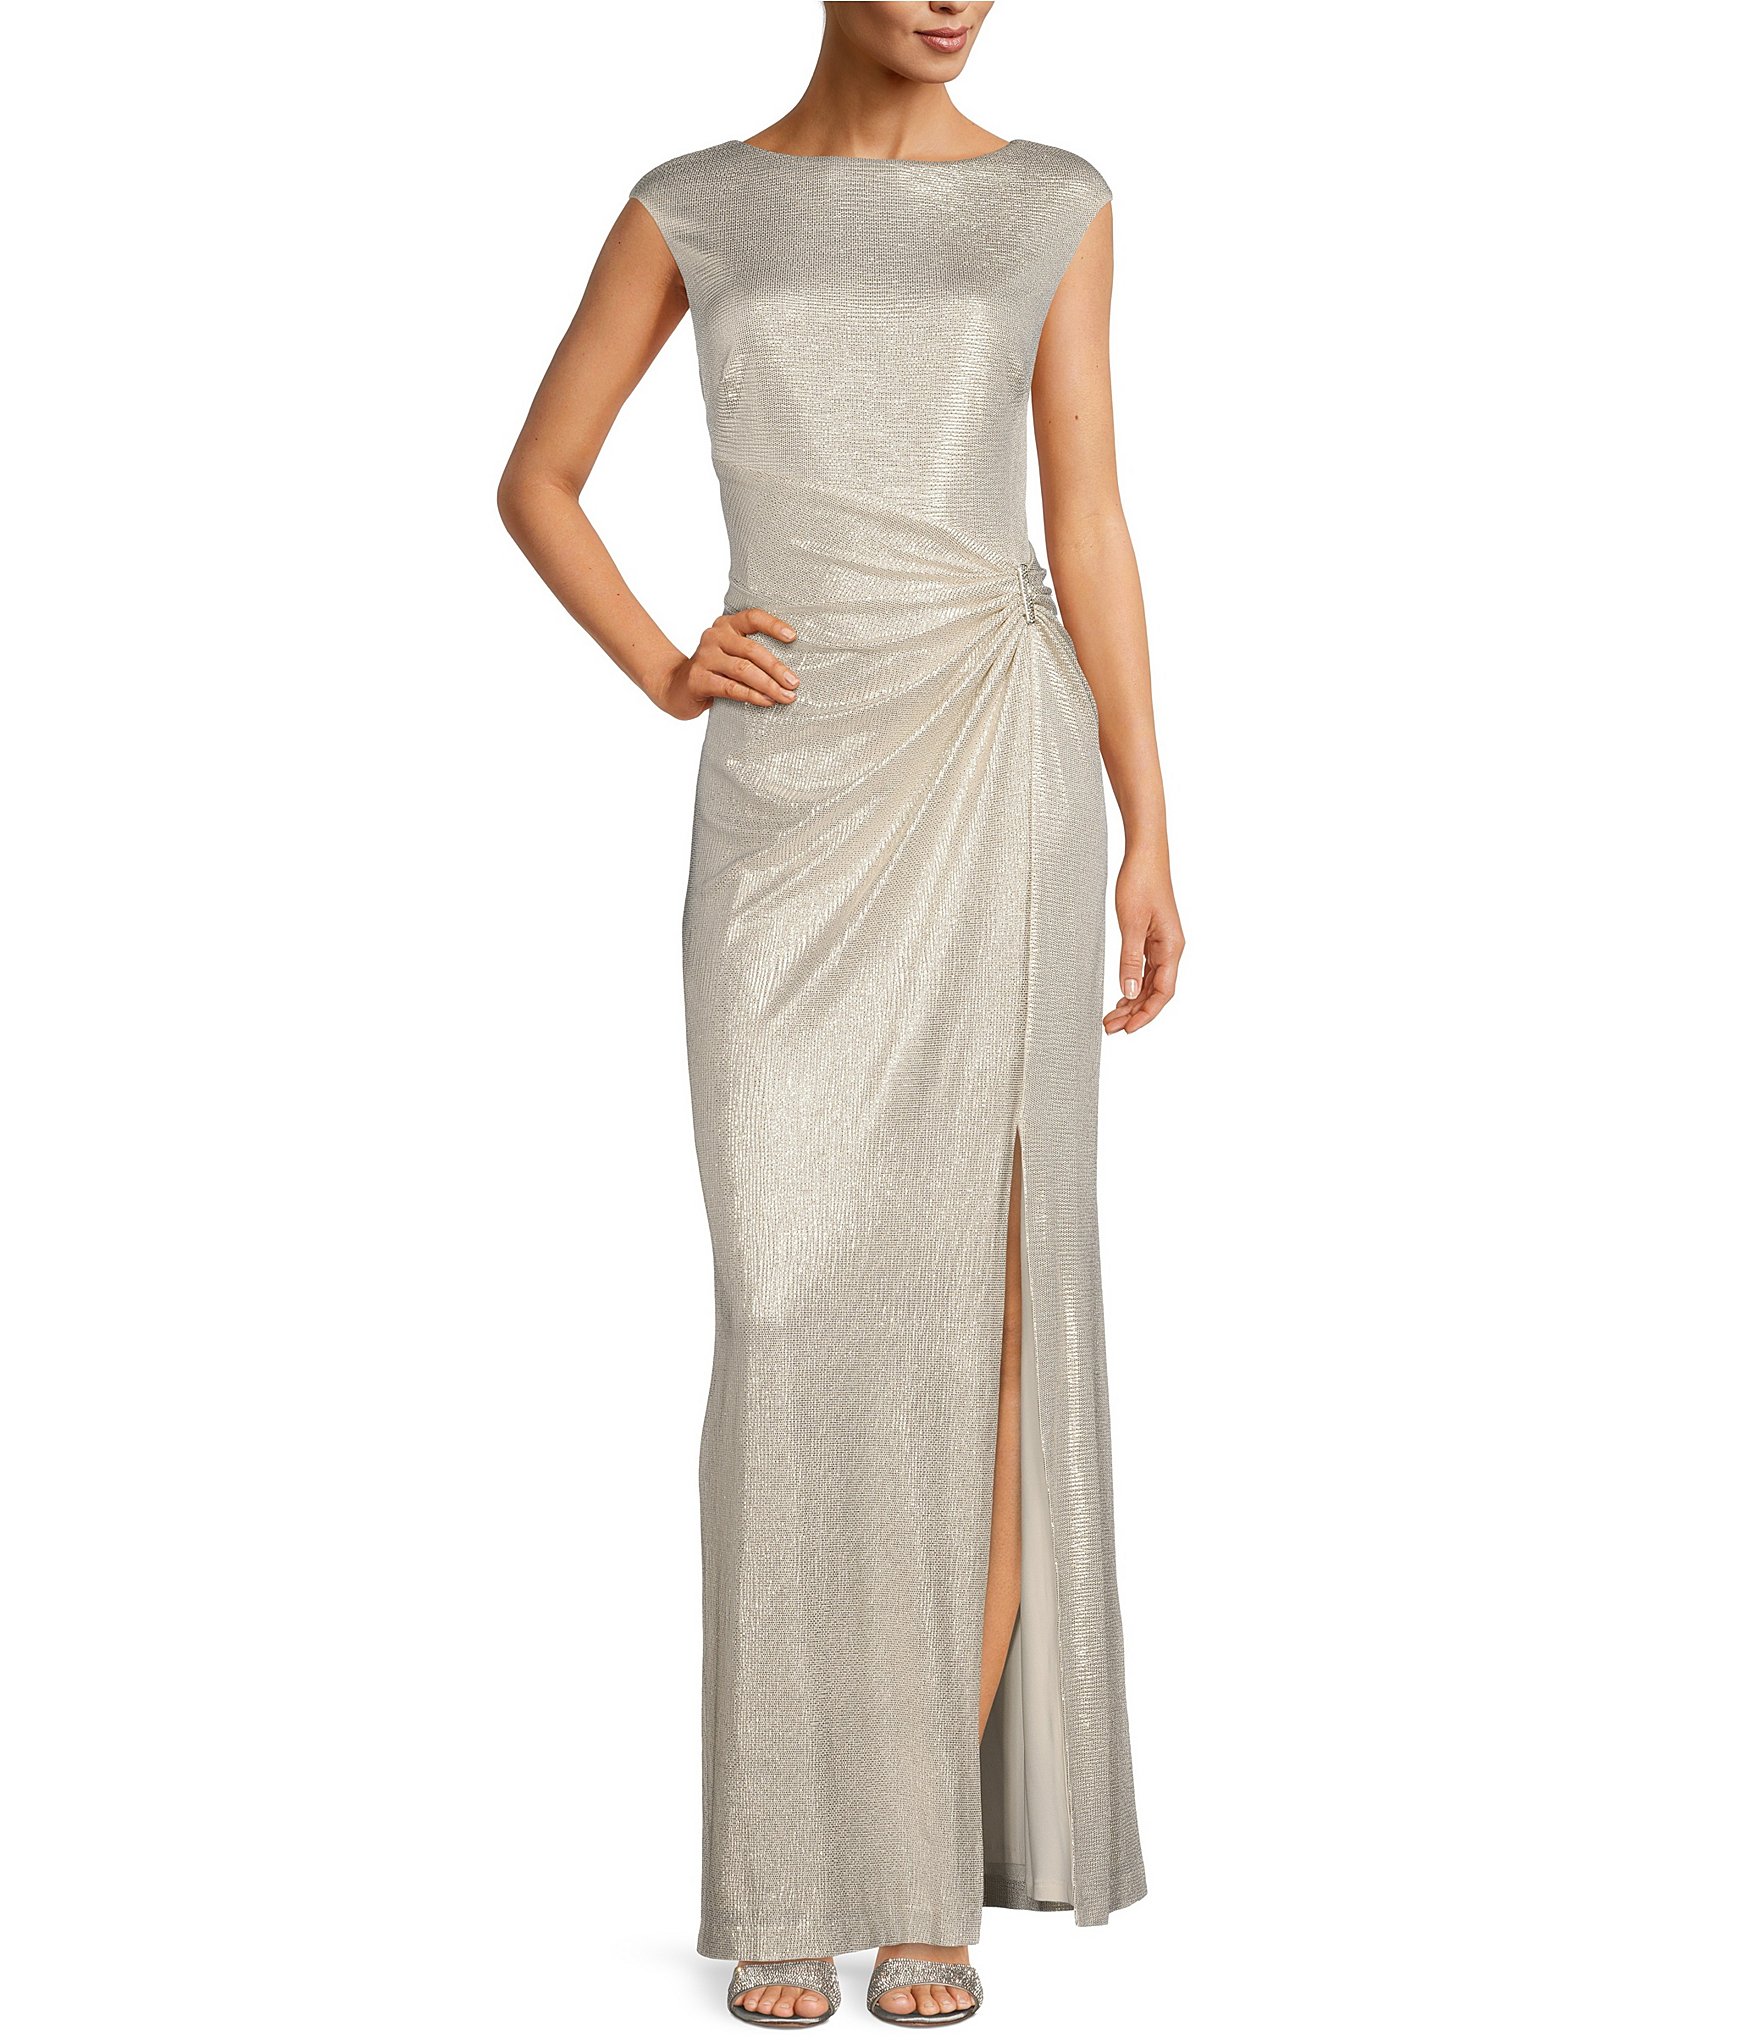 Sale & Clearance Fit And Flare Women's Formal Dresses & Evening Gowns |  Dillard's